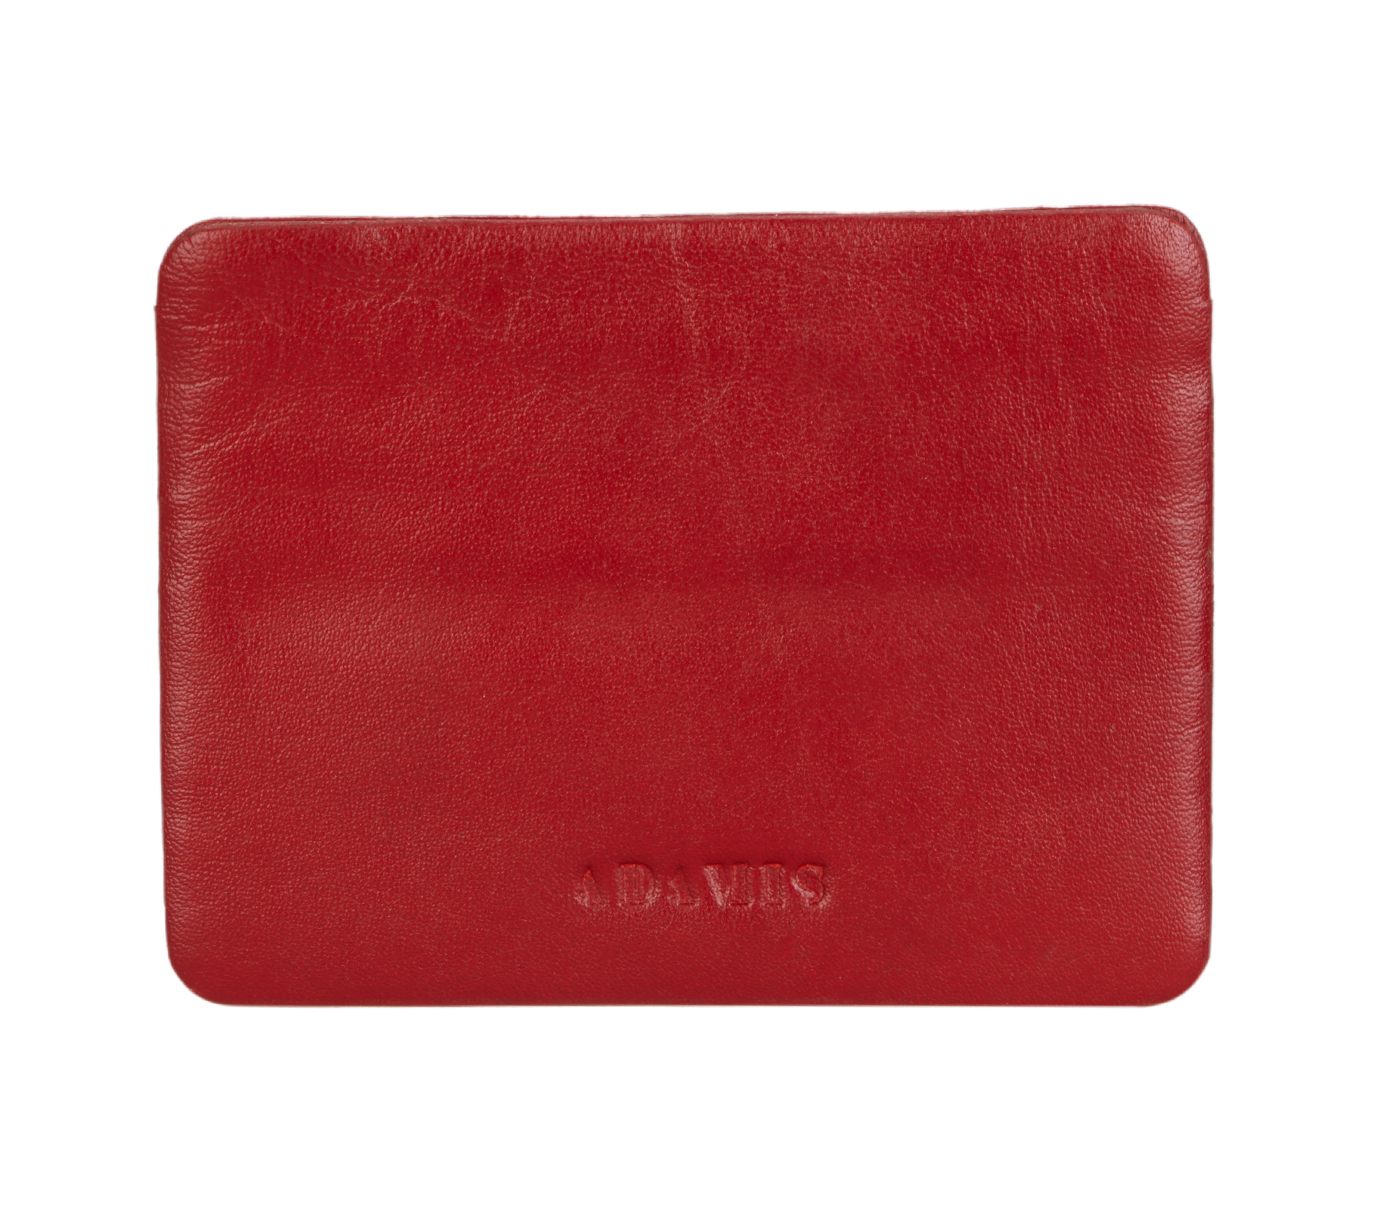 VW7--Ultra Slim Credit Card Case in Genuine Leather - Red